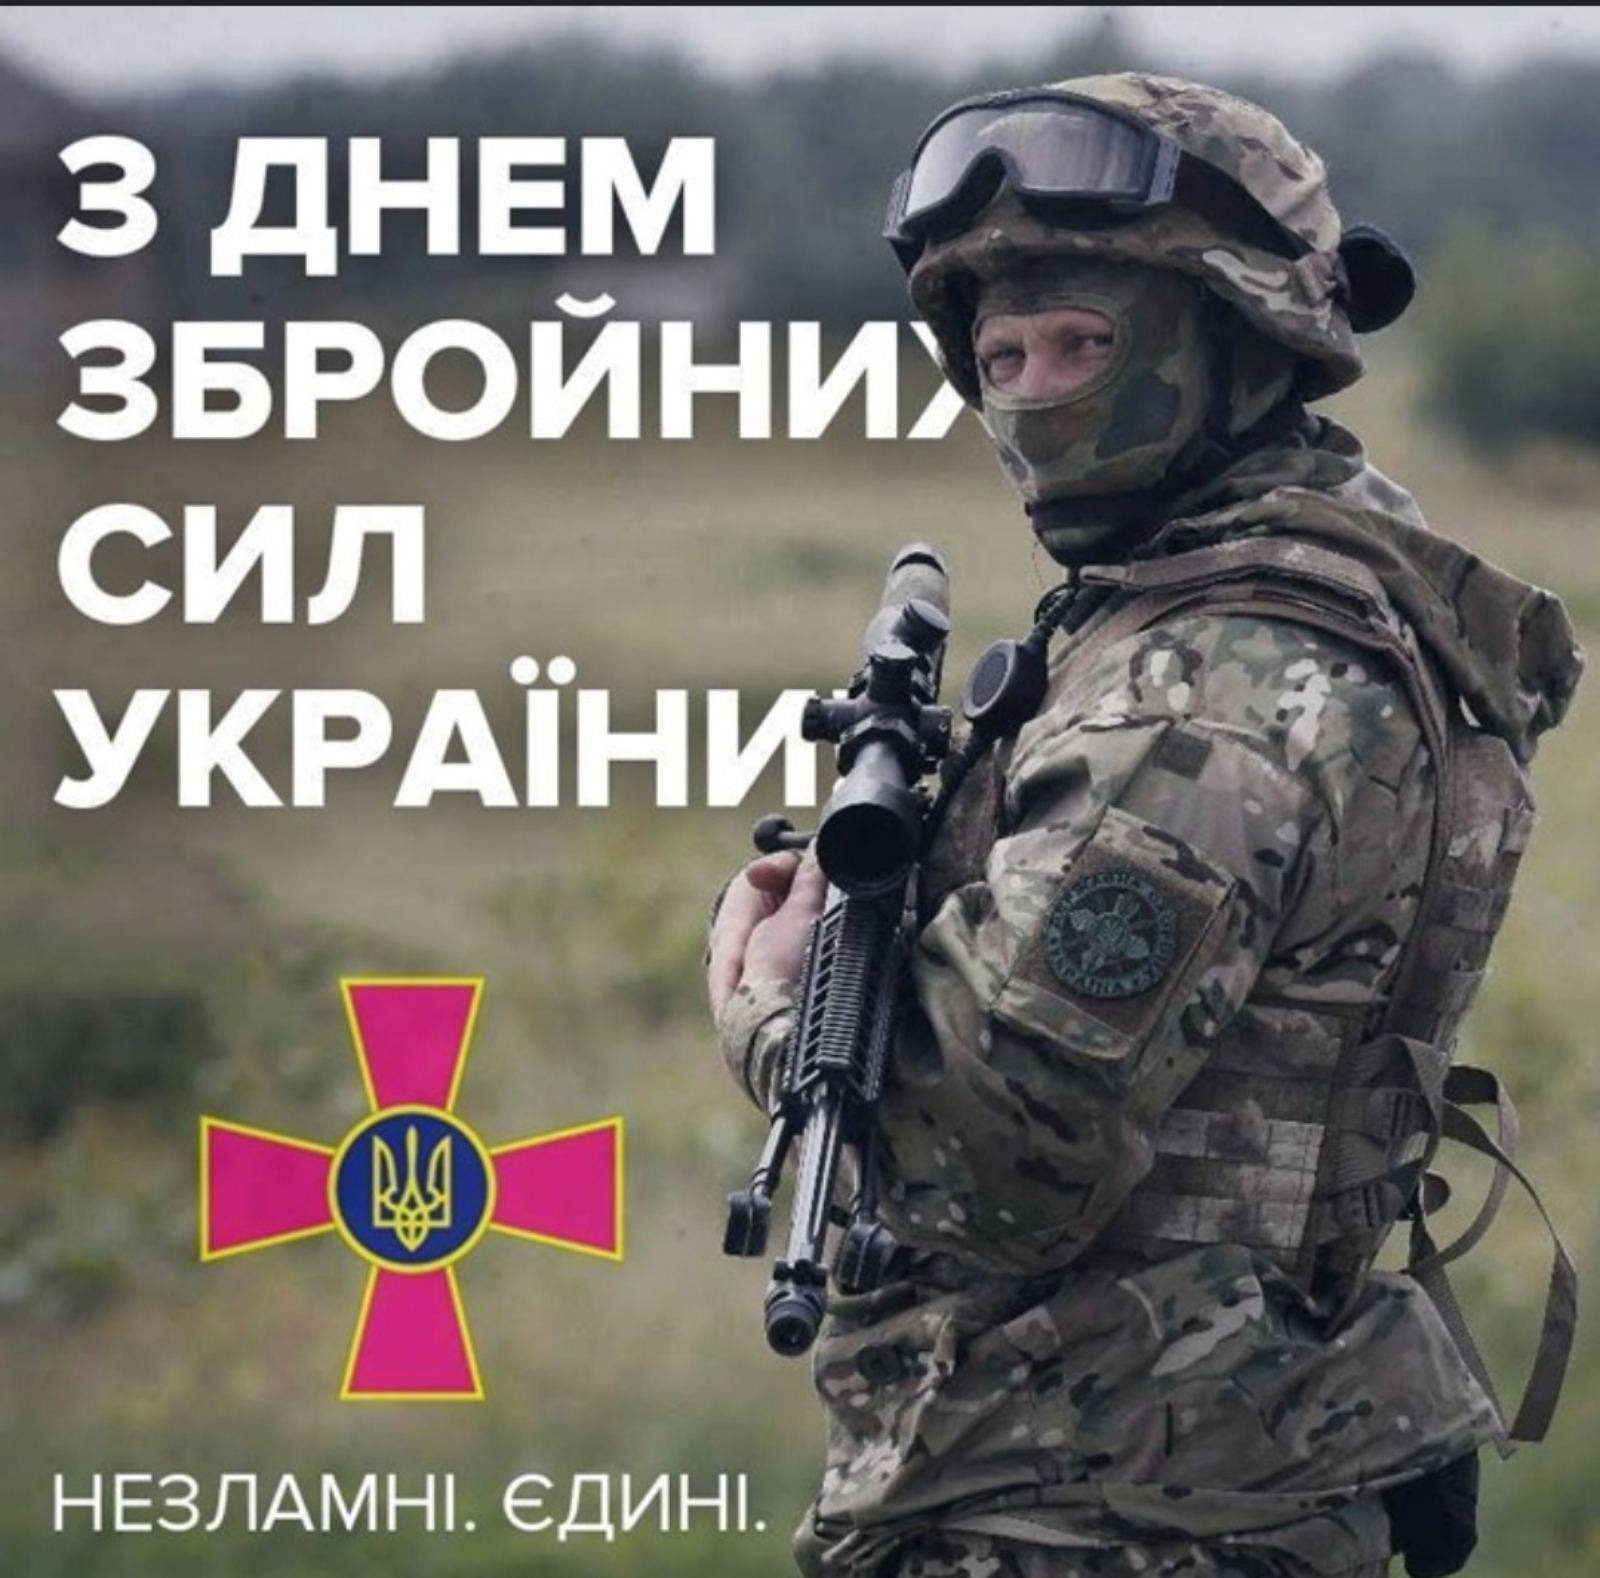 The Day of the Armed Forces of Ukraine is marked on December 6